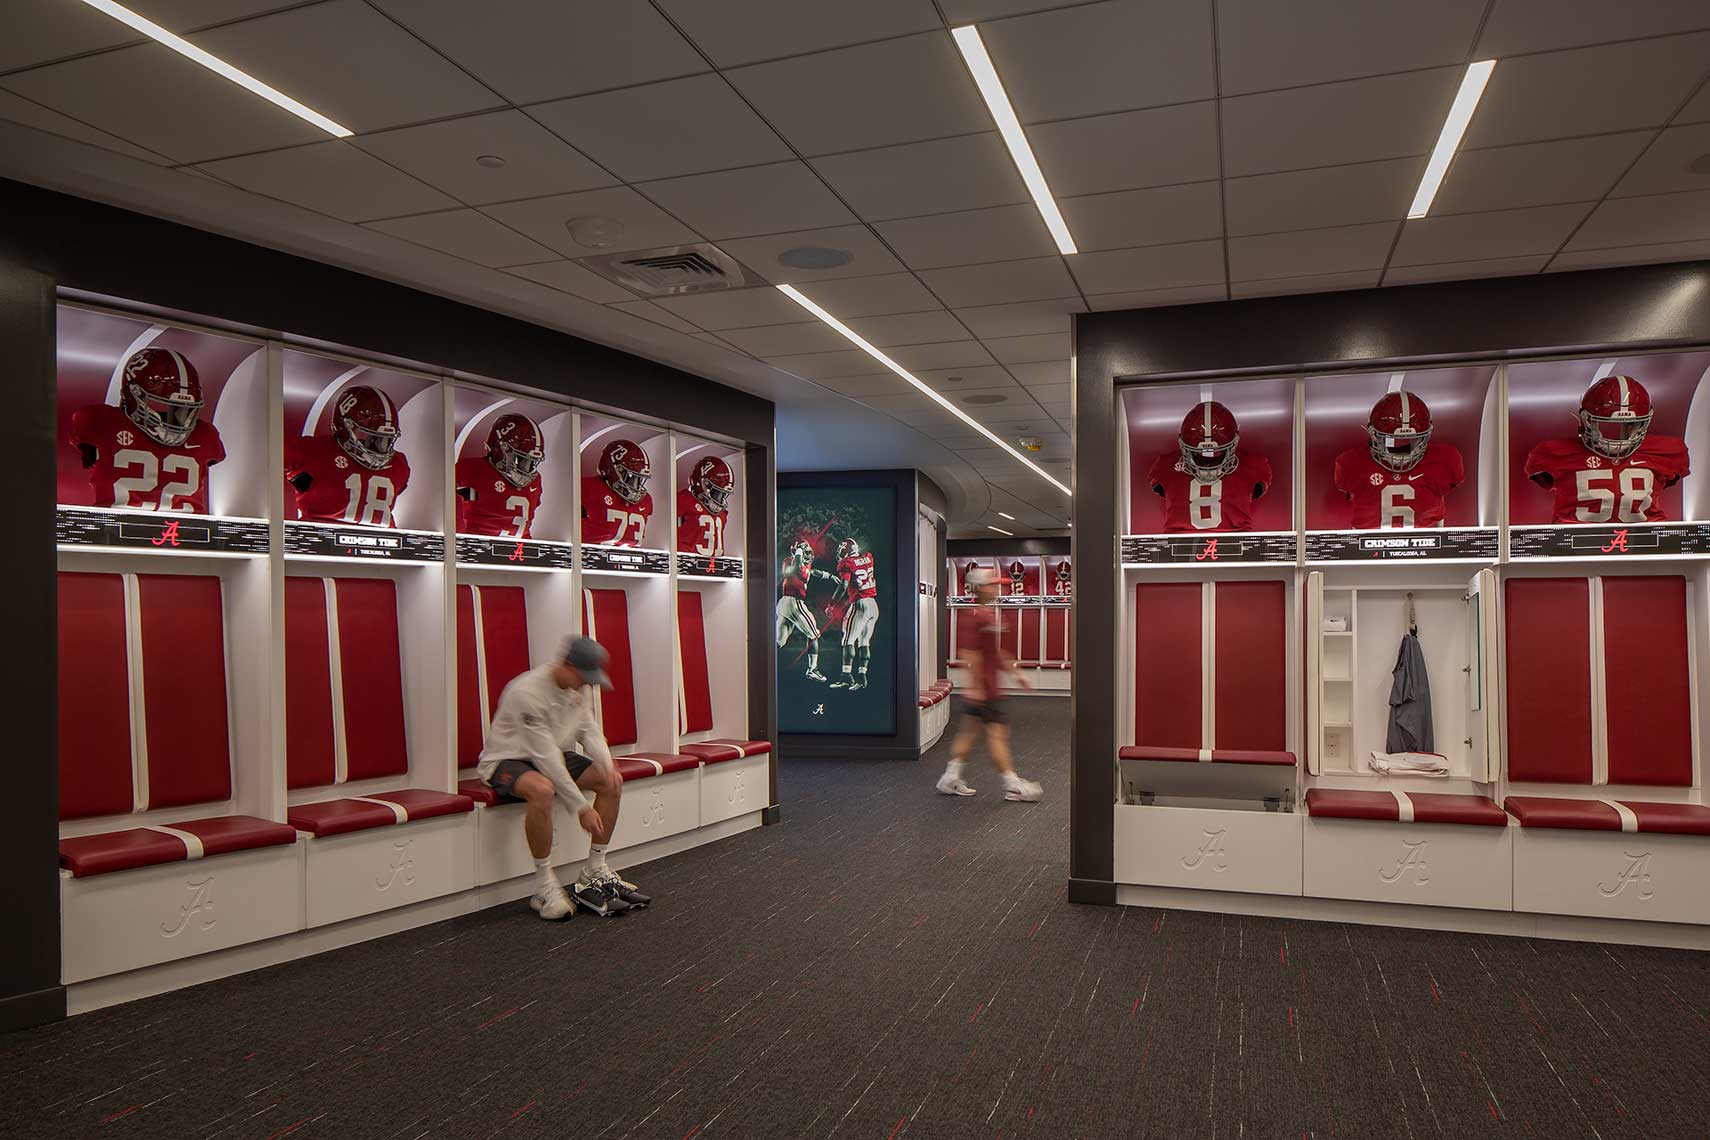 Players prepare for a game in the University of Alabama locker room at Bryant-Deny Stadium